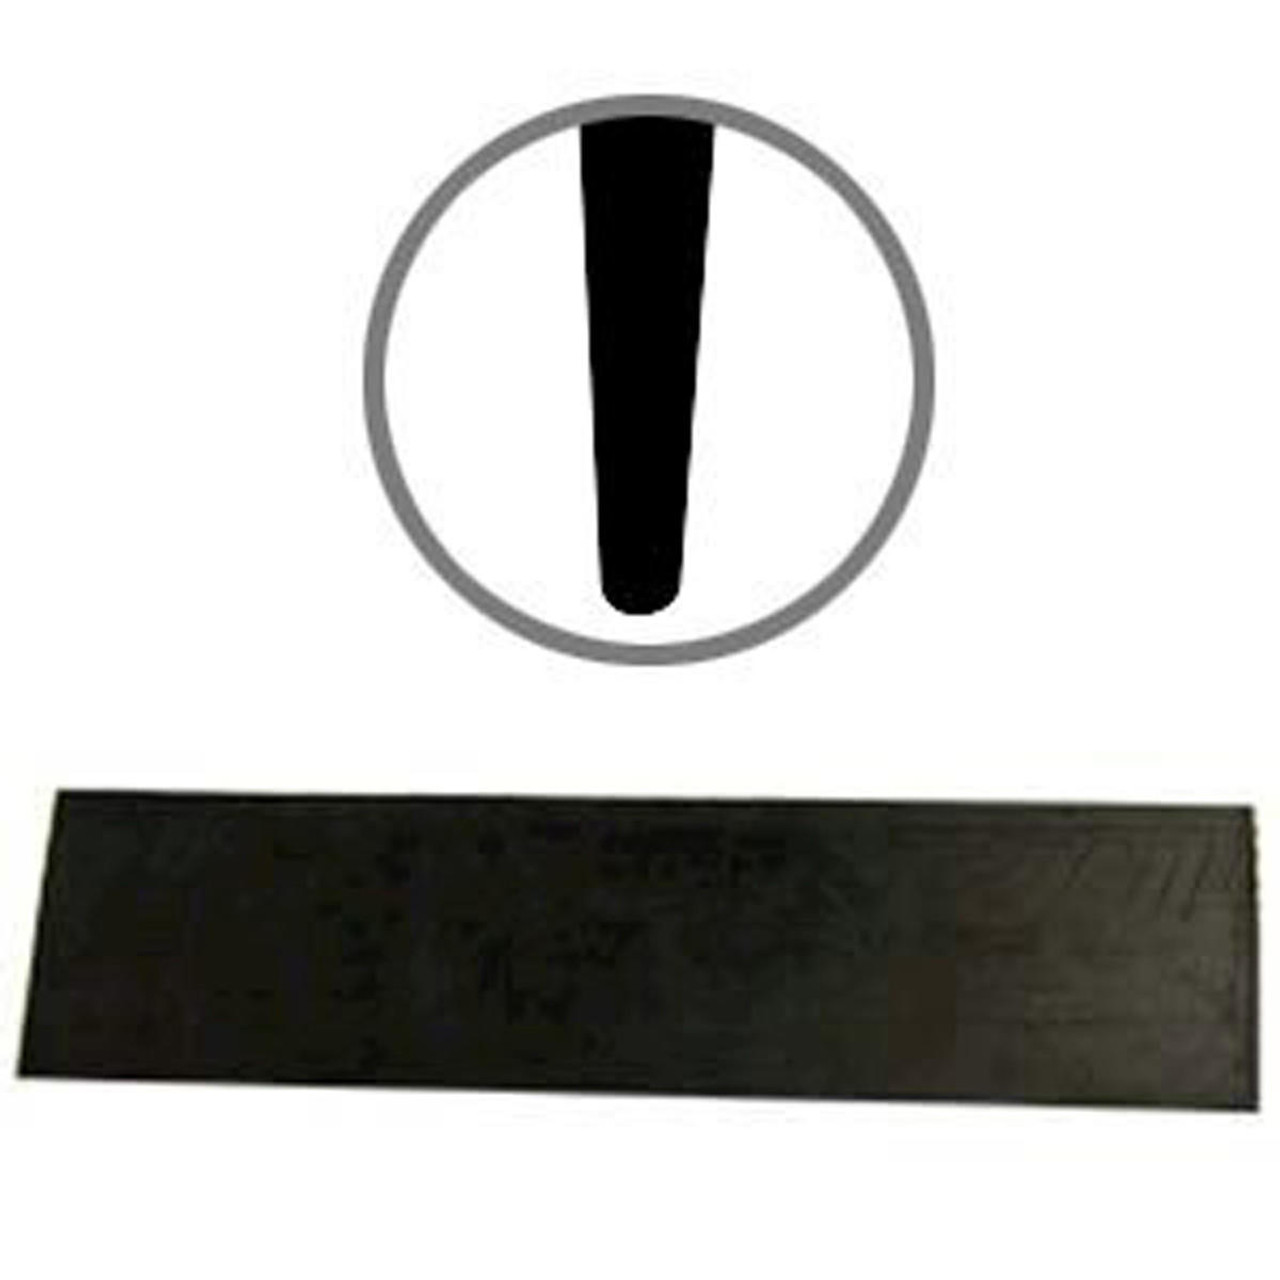 Midwest Rake 72 x 3 Round Edge Tapered Black Rubber Squeegee Blade